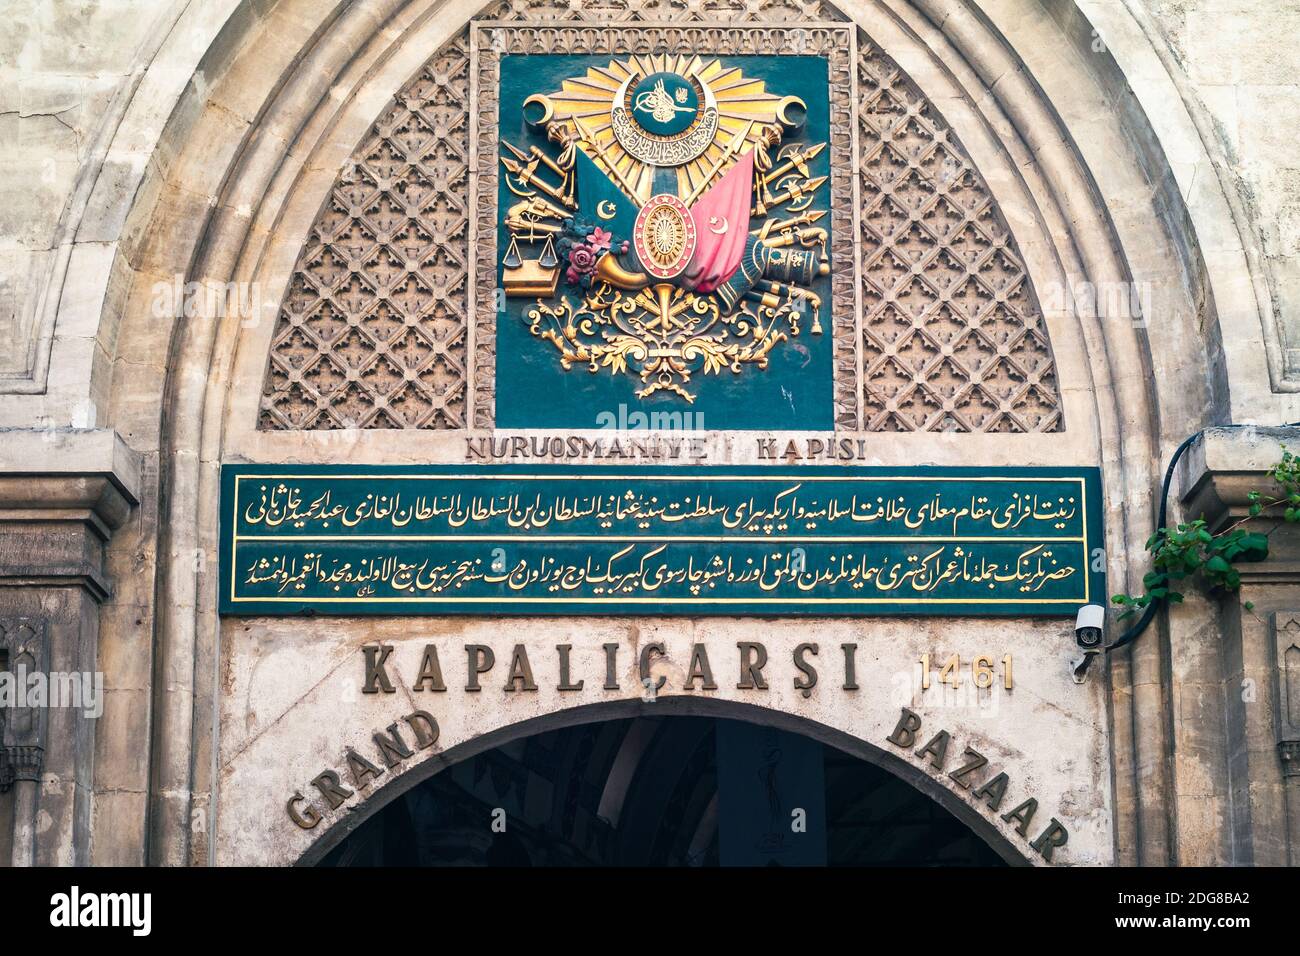 Istanbul, Turkey - June 7 2014: Nuruosmaniye Gate at the Grand Bazaar. The Entrance to the Covered Market called Bazar. Stock Photo